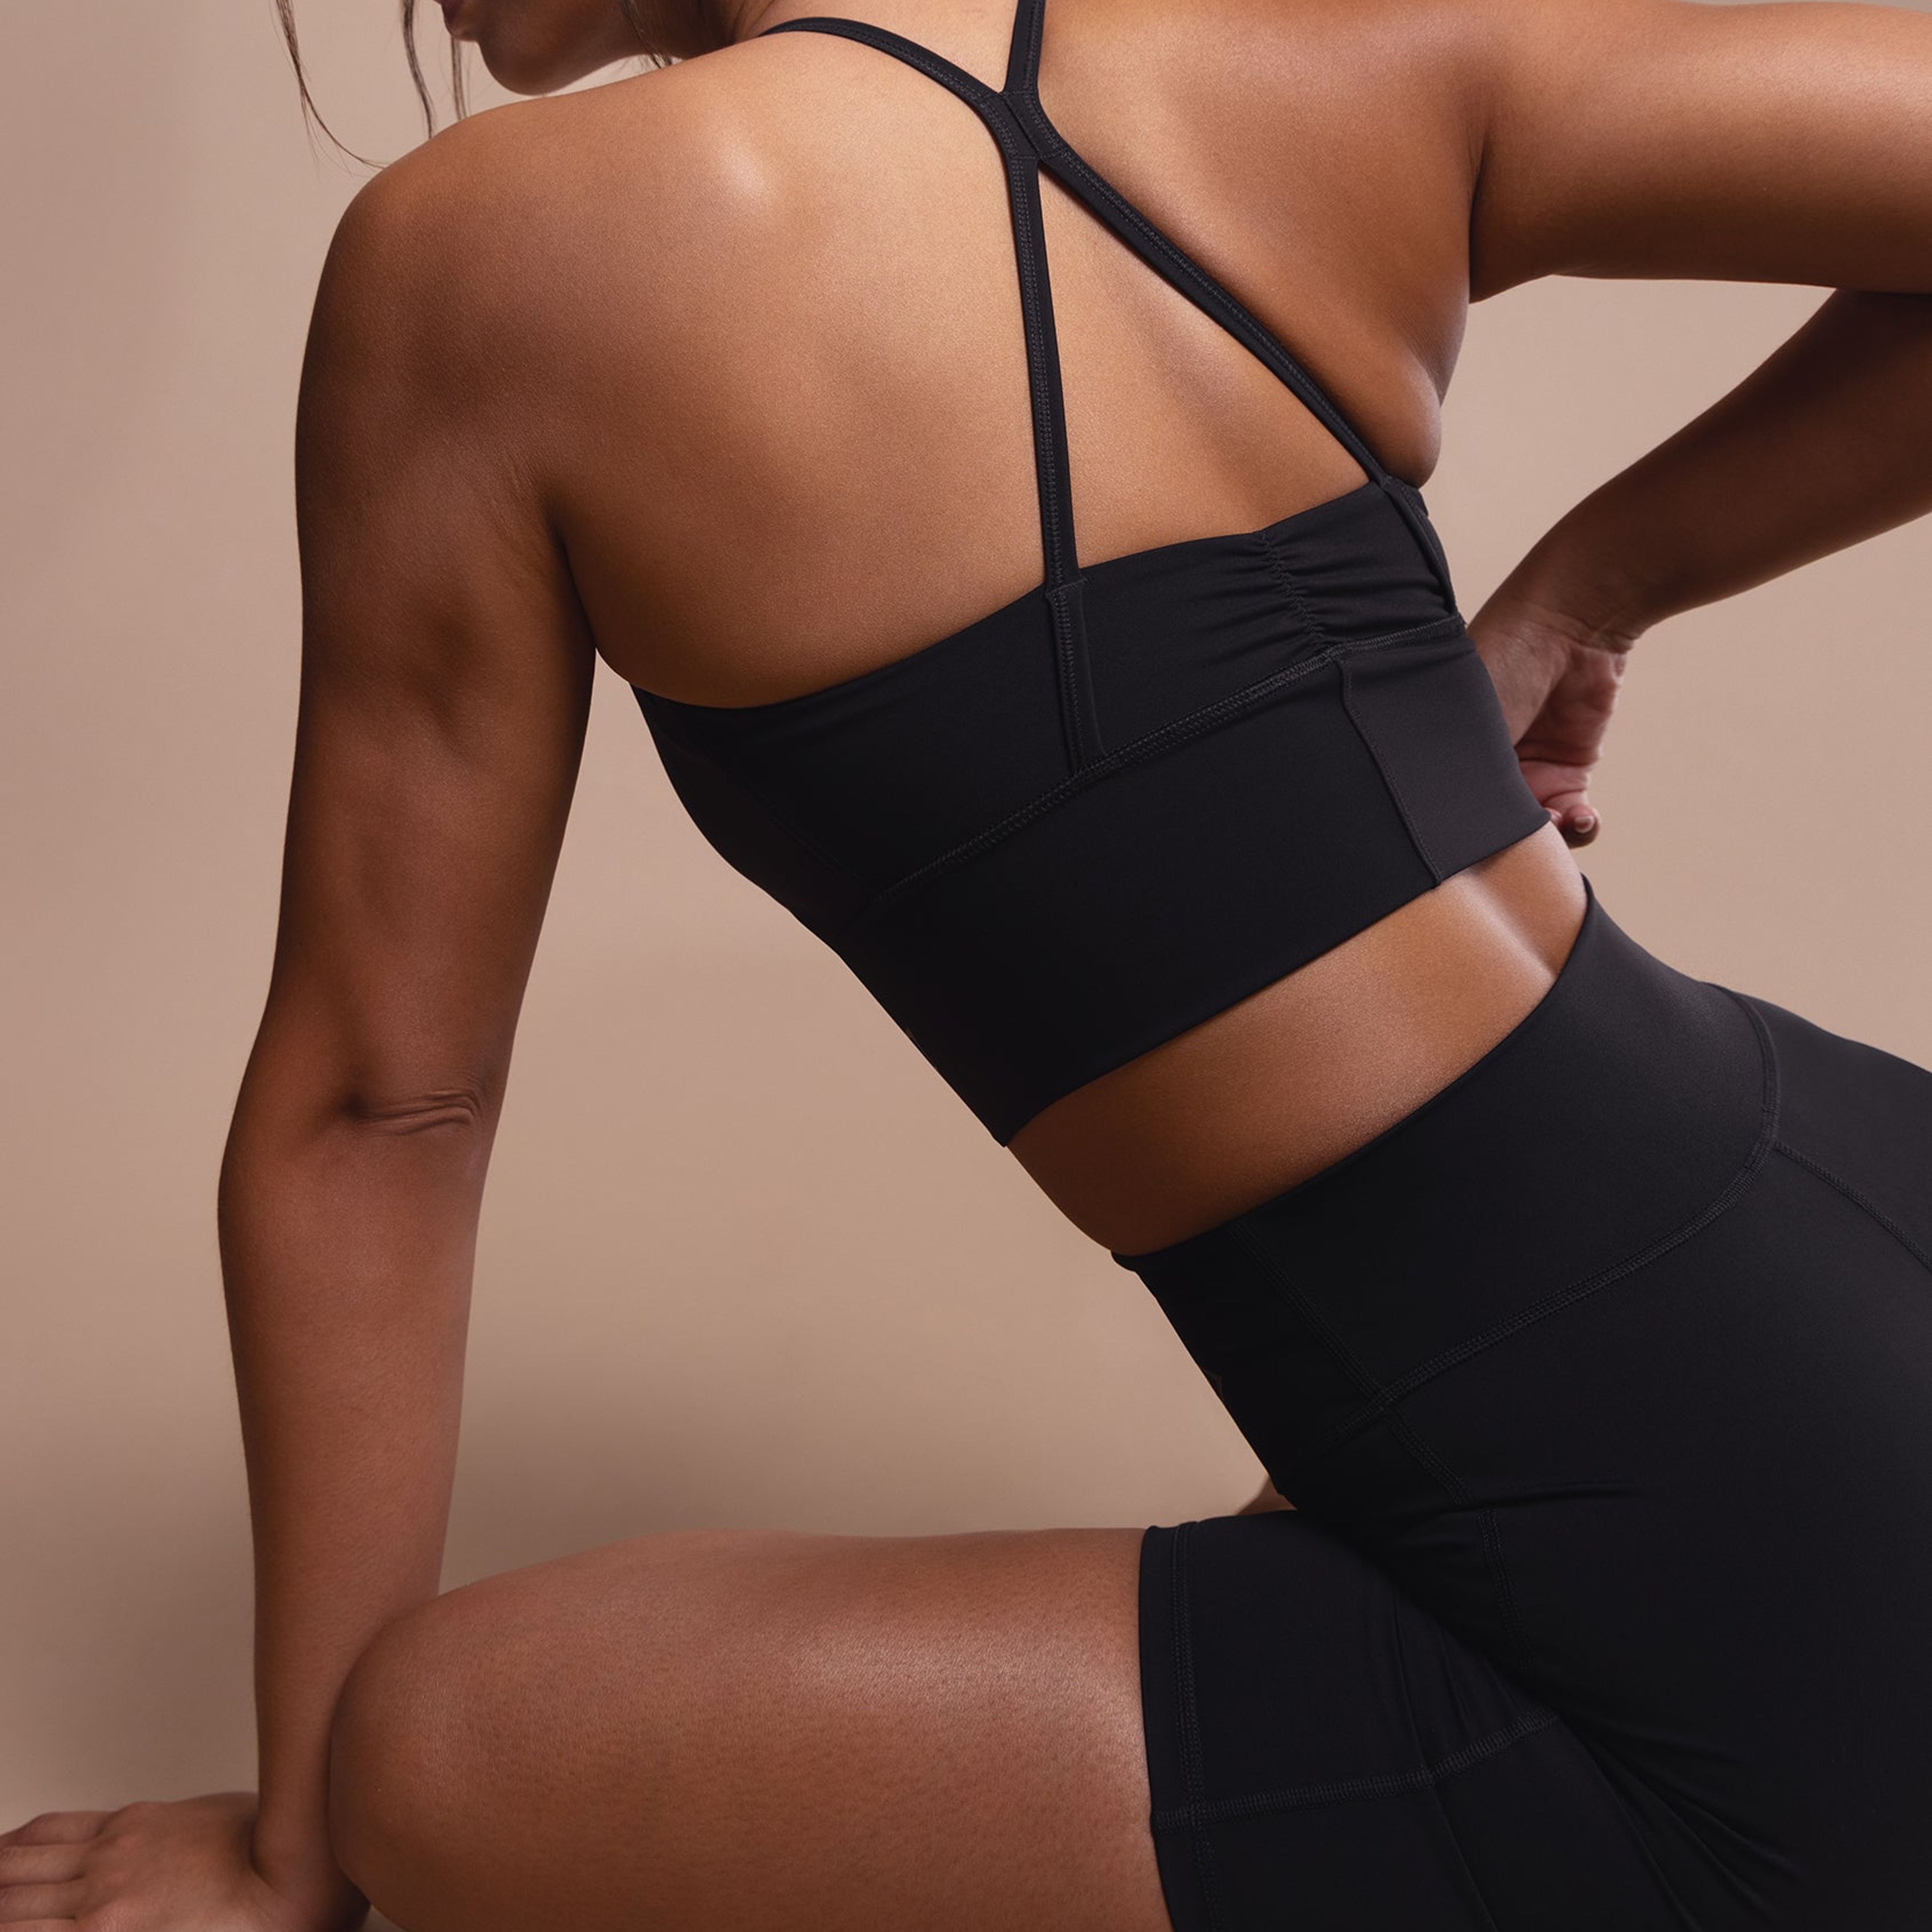 https://cdn.prod.marmalade.co/products/3840x3840/filters:quality(80)/www.gymshark.com%2Fproducts%2Fgymshark-elevate-longline-sports-bra-black-aw22%2F1692959286%2FLook21239-Edit2_cd917664-40e1-4c61-ad09-5653336eac88.jpg